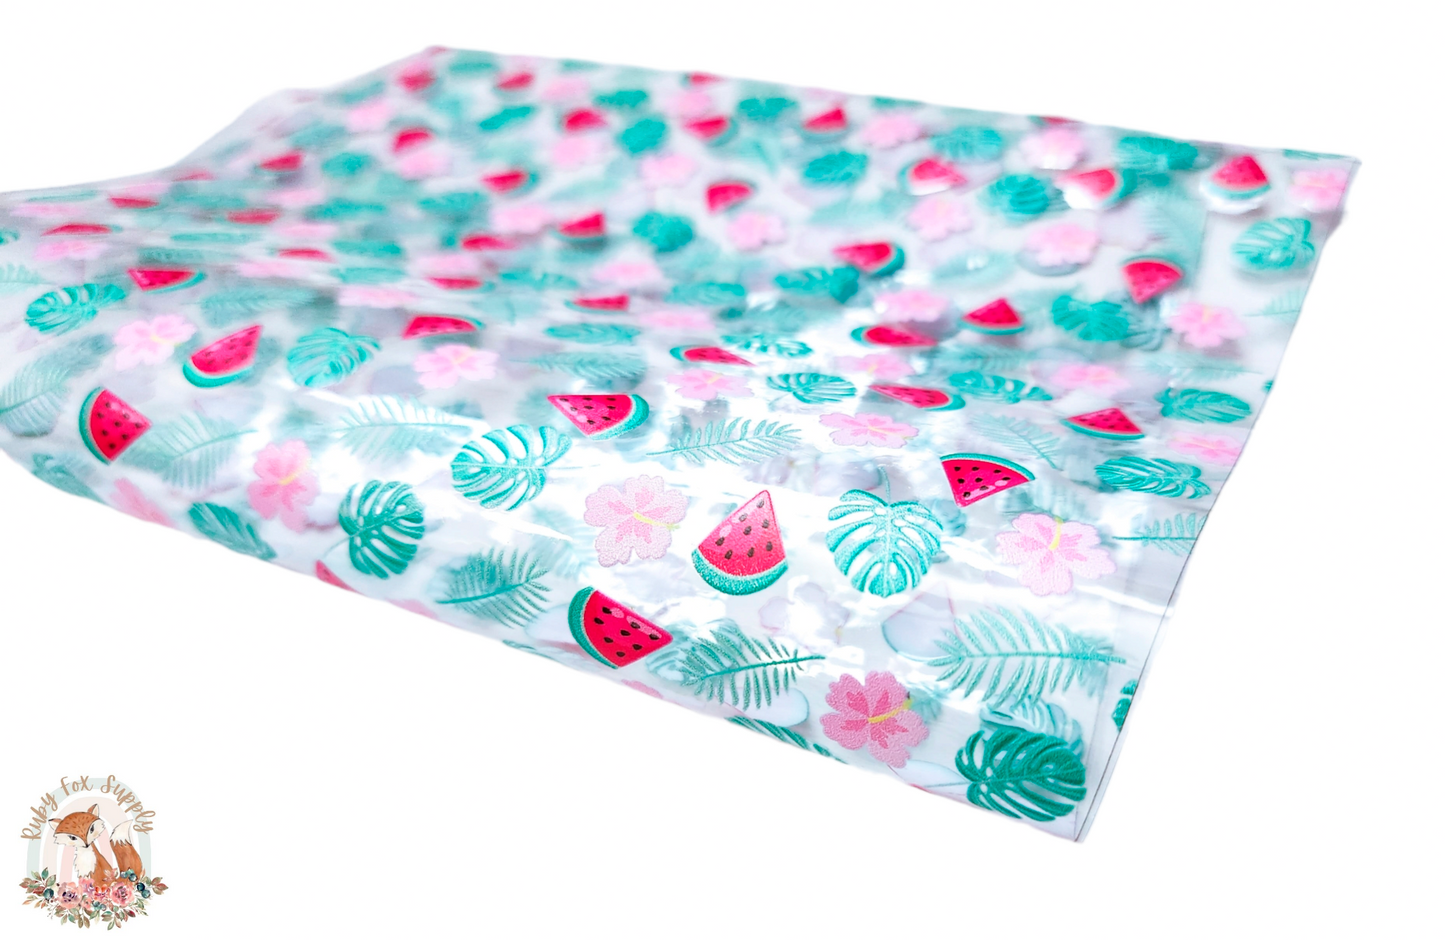 Watermelon Leaves Printed Jelly sheet